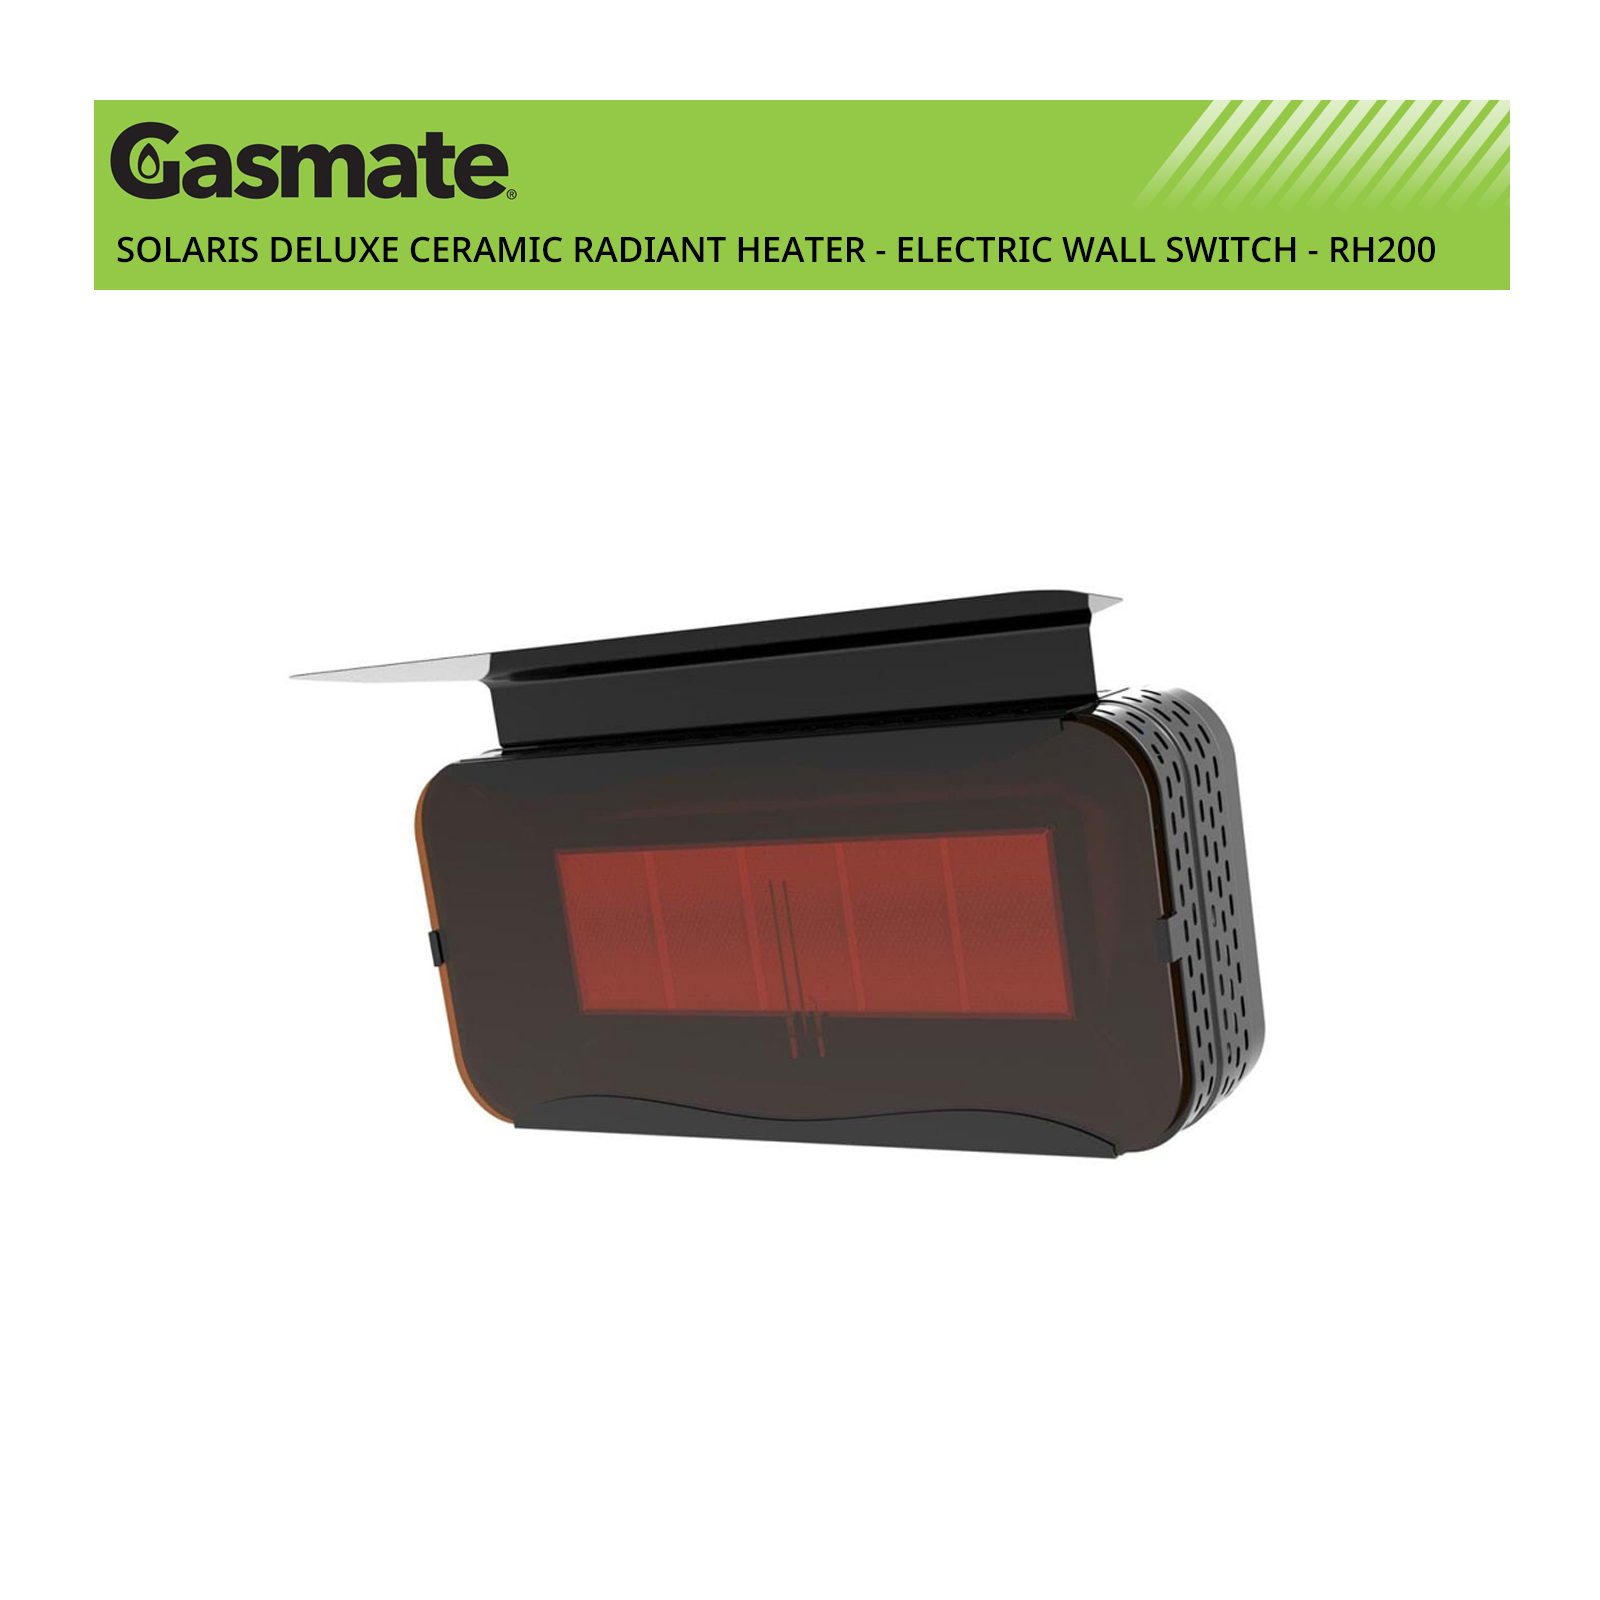 Gasmate Natural Gas Solaris Deluxe Ceramic Radiant Heater with Electric Wall Switch - RH200